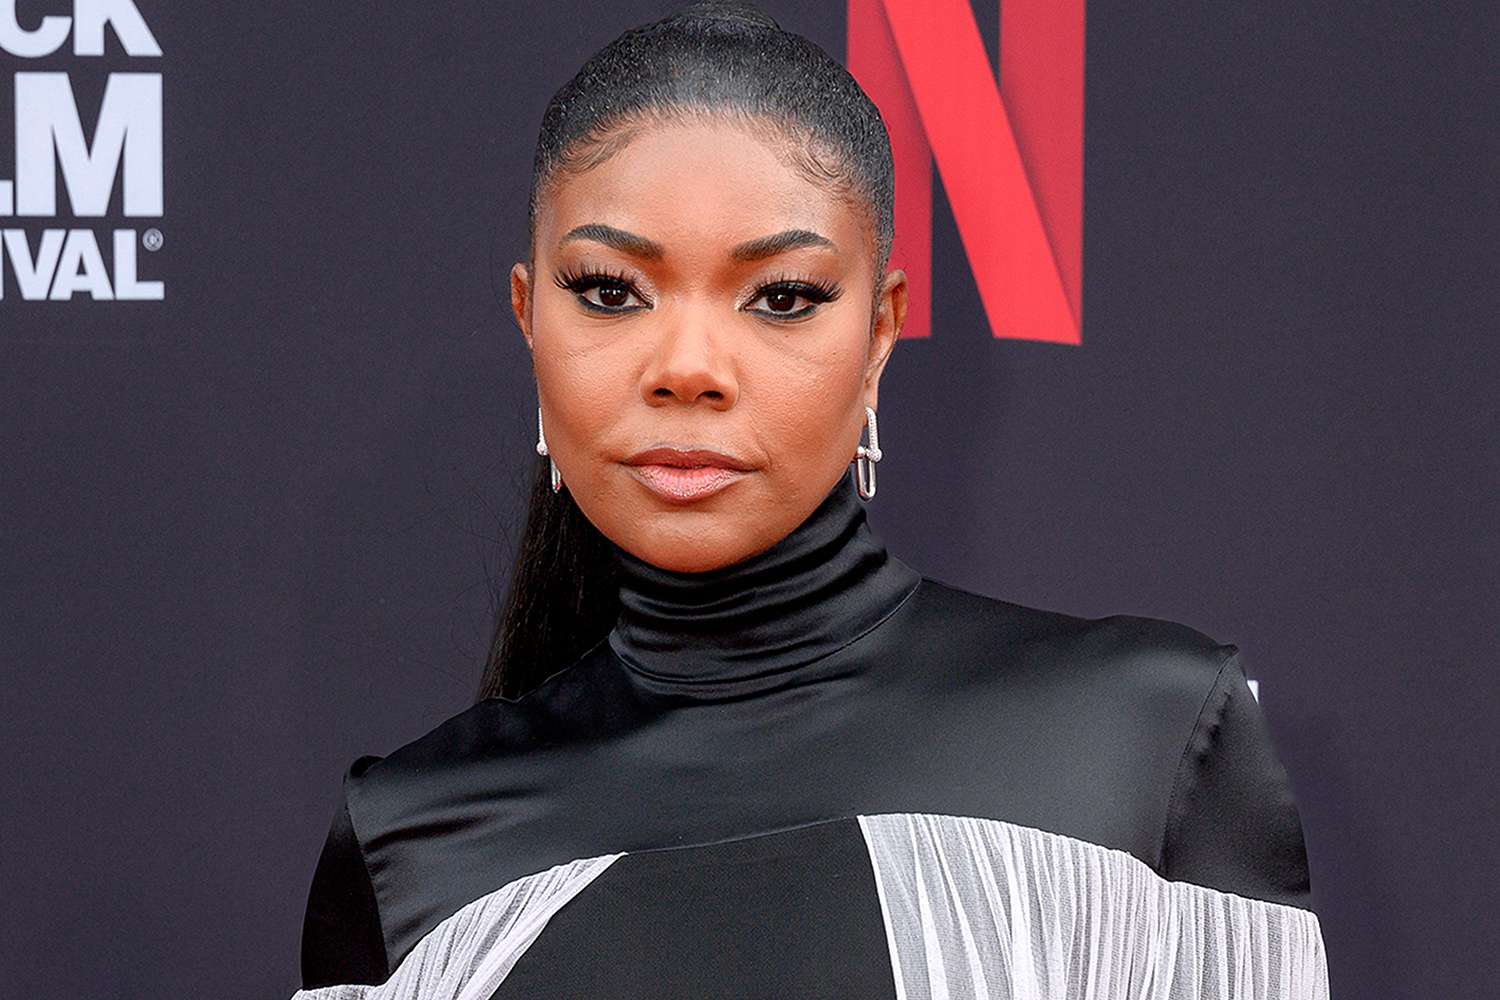 Gabrielle Union Wears Menswear-Inspired Look to L.A. Pop-Up Event [Video]